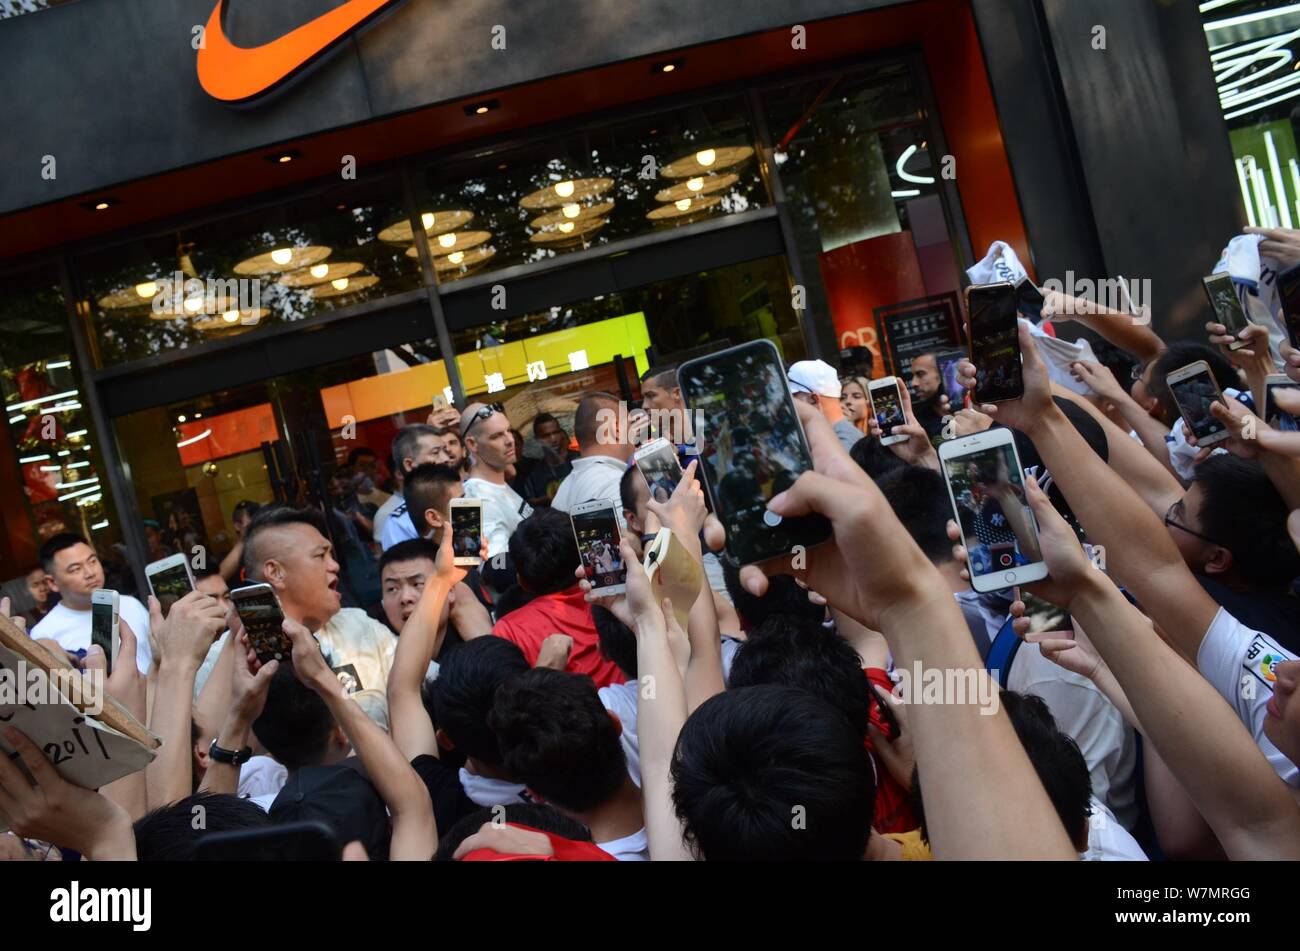 Portuguese football player Cristiano Ronaldo of Real Madrid is surrounded  by fans during a fan meeting event at a Nike sportswear store in Shanghai,  C Stock Photo - Alamy